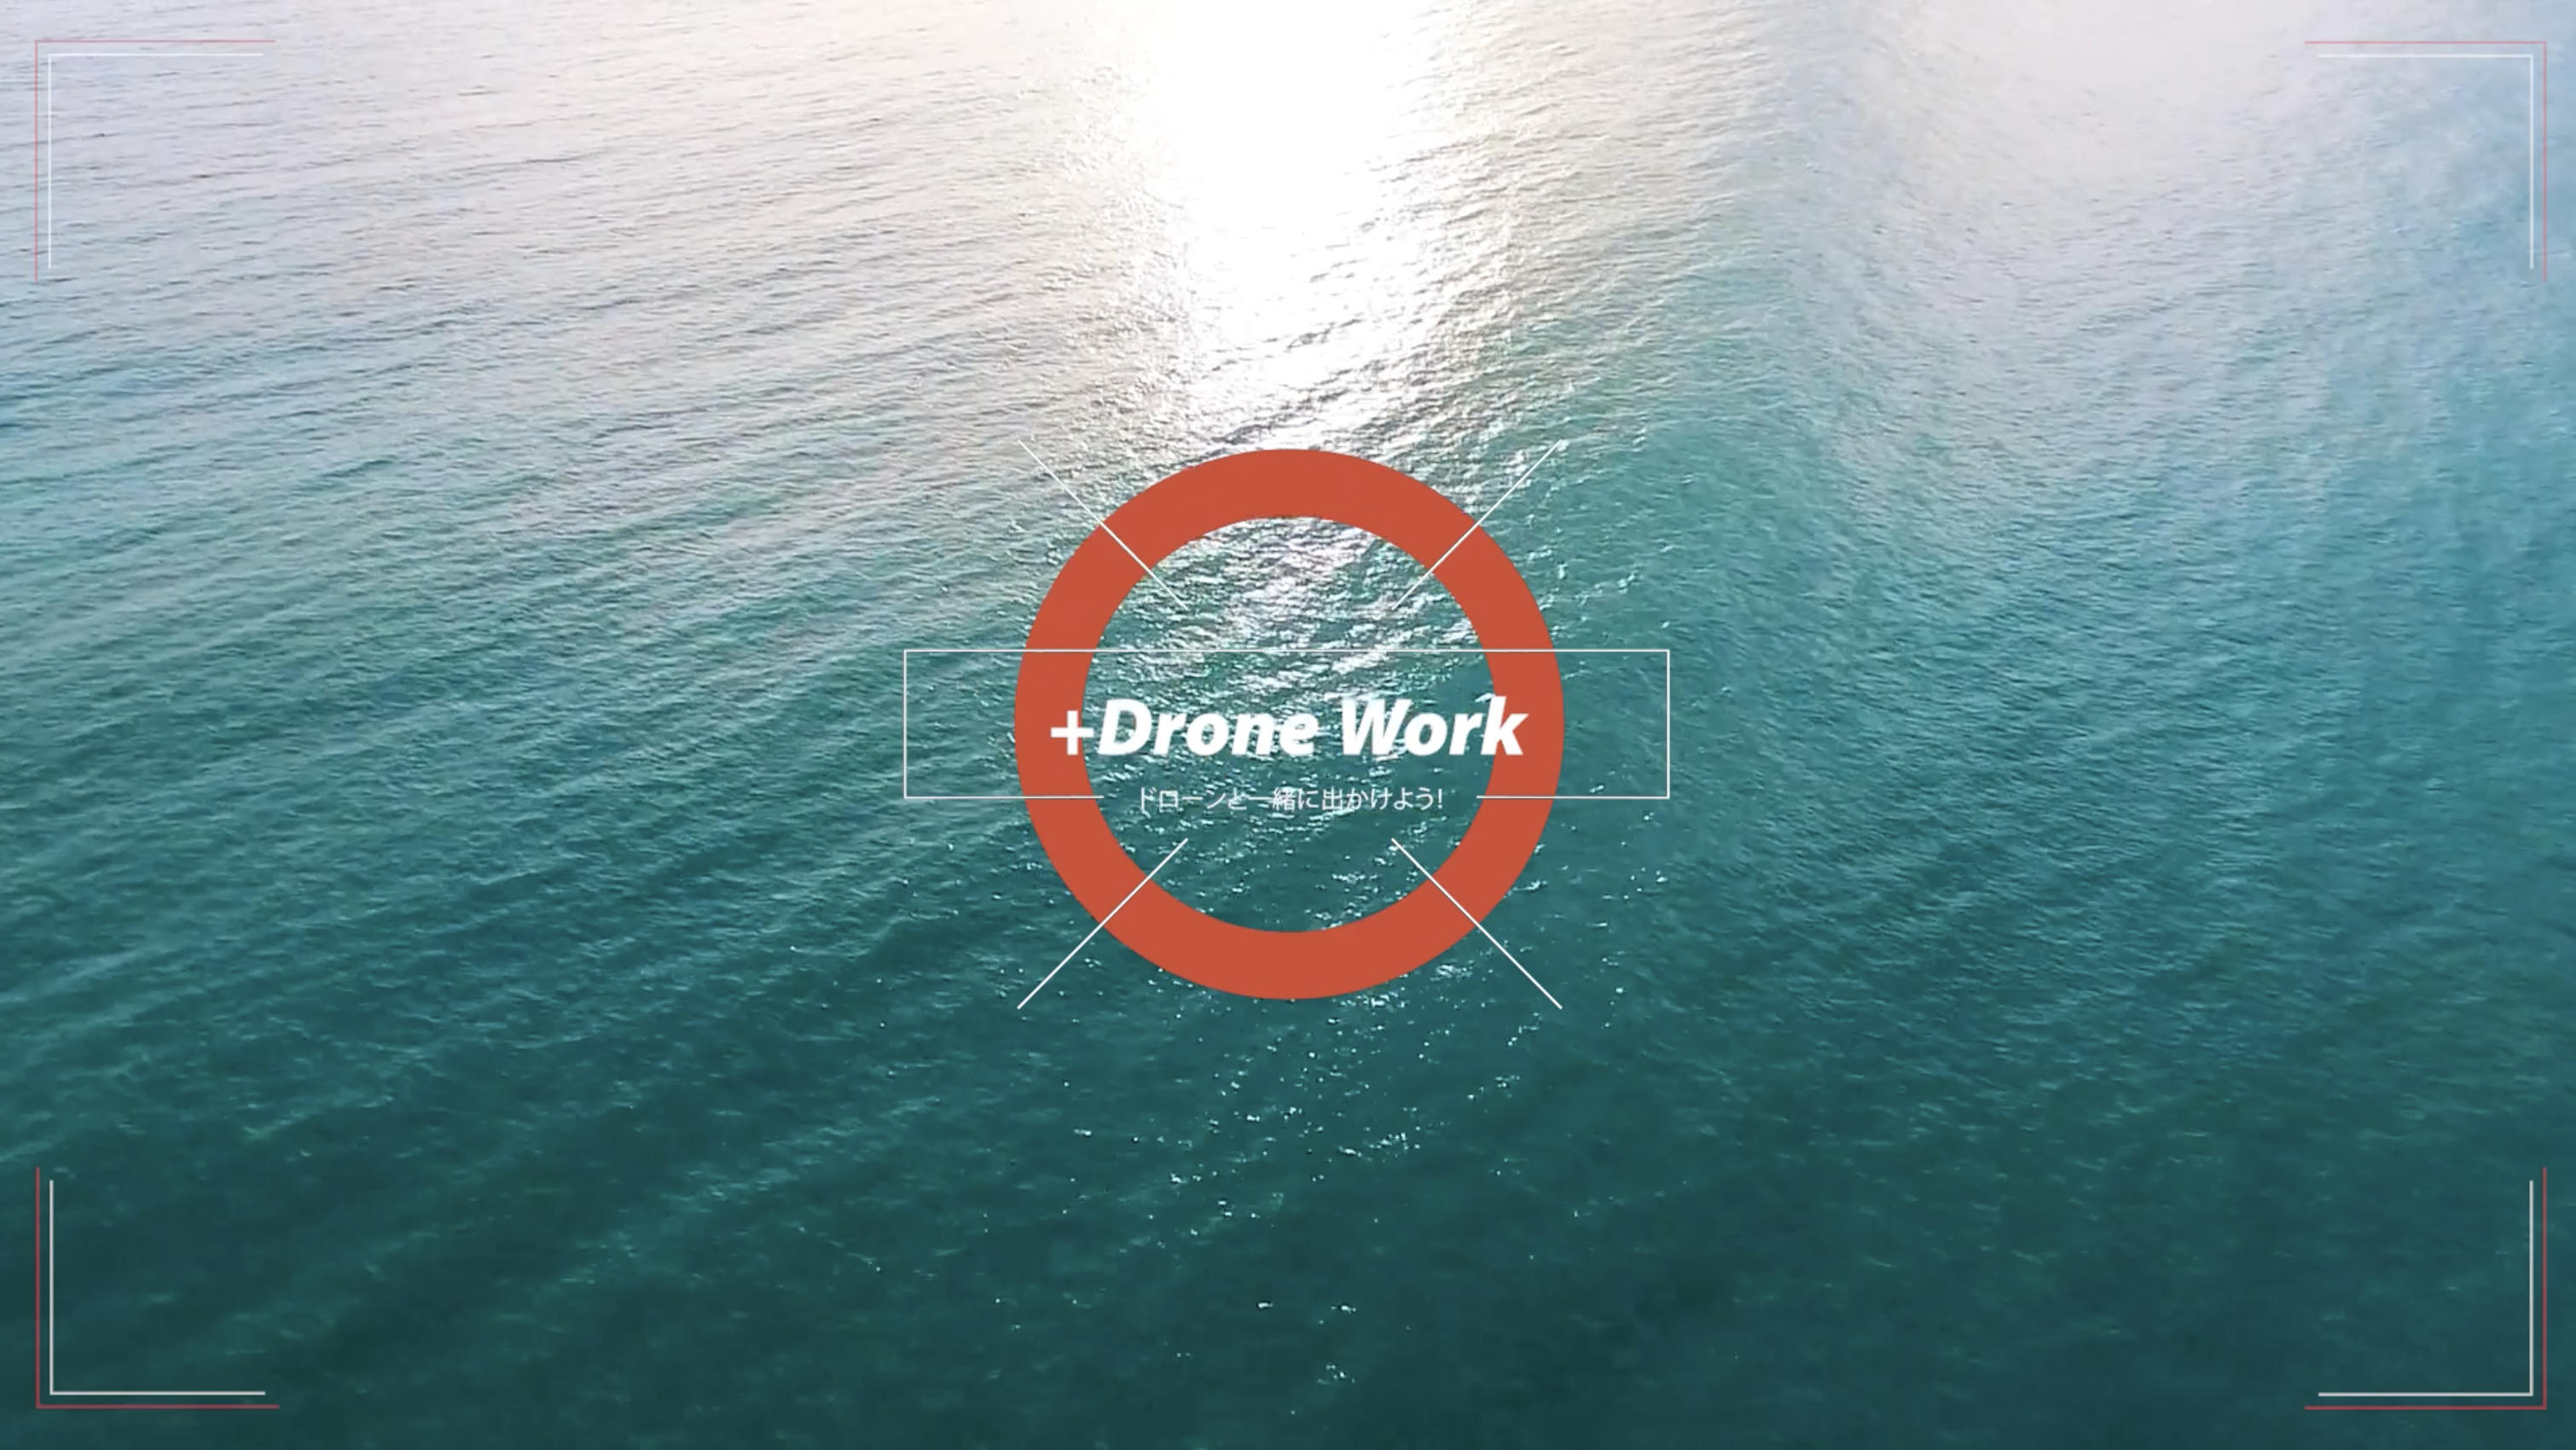 About +Drone Work